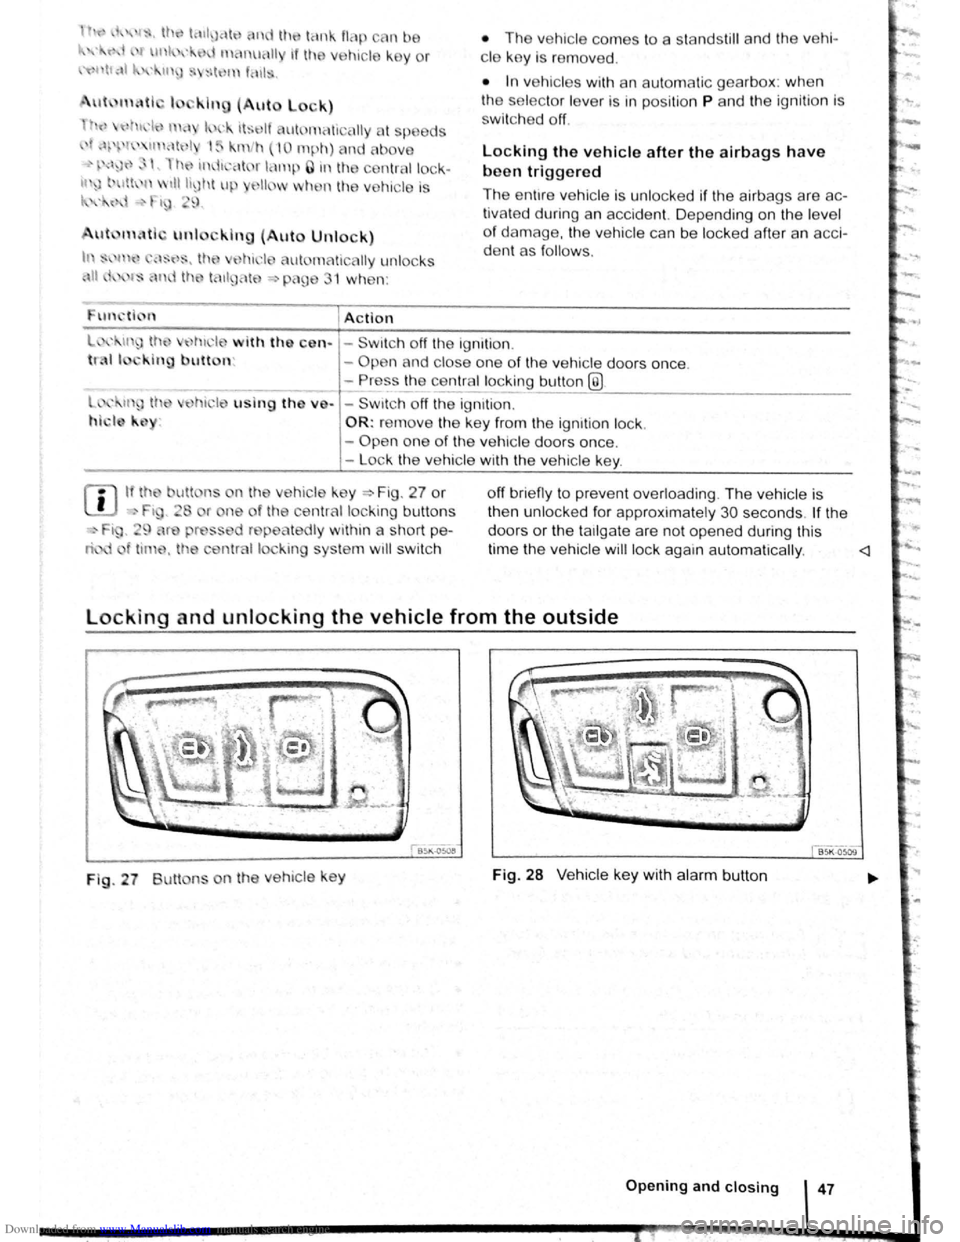 VOLKSWAGEN BEETLE 2008 Owners Guide Downloaded from www.Manualslib.com manuals search engine  h{ ,~ I,. U rl lC1tlJclt nd th tank flap cnn  be 
·  r 1 unhx I n tFinuHII if th e ve hic le k e y or 
"'~' tf,\1 1-. • "J